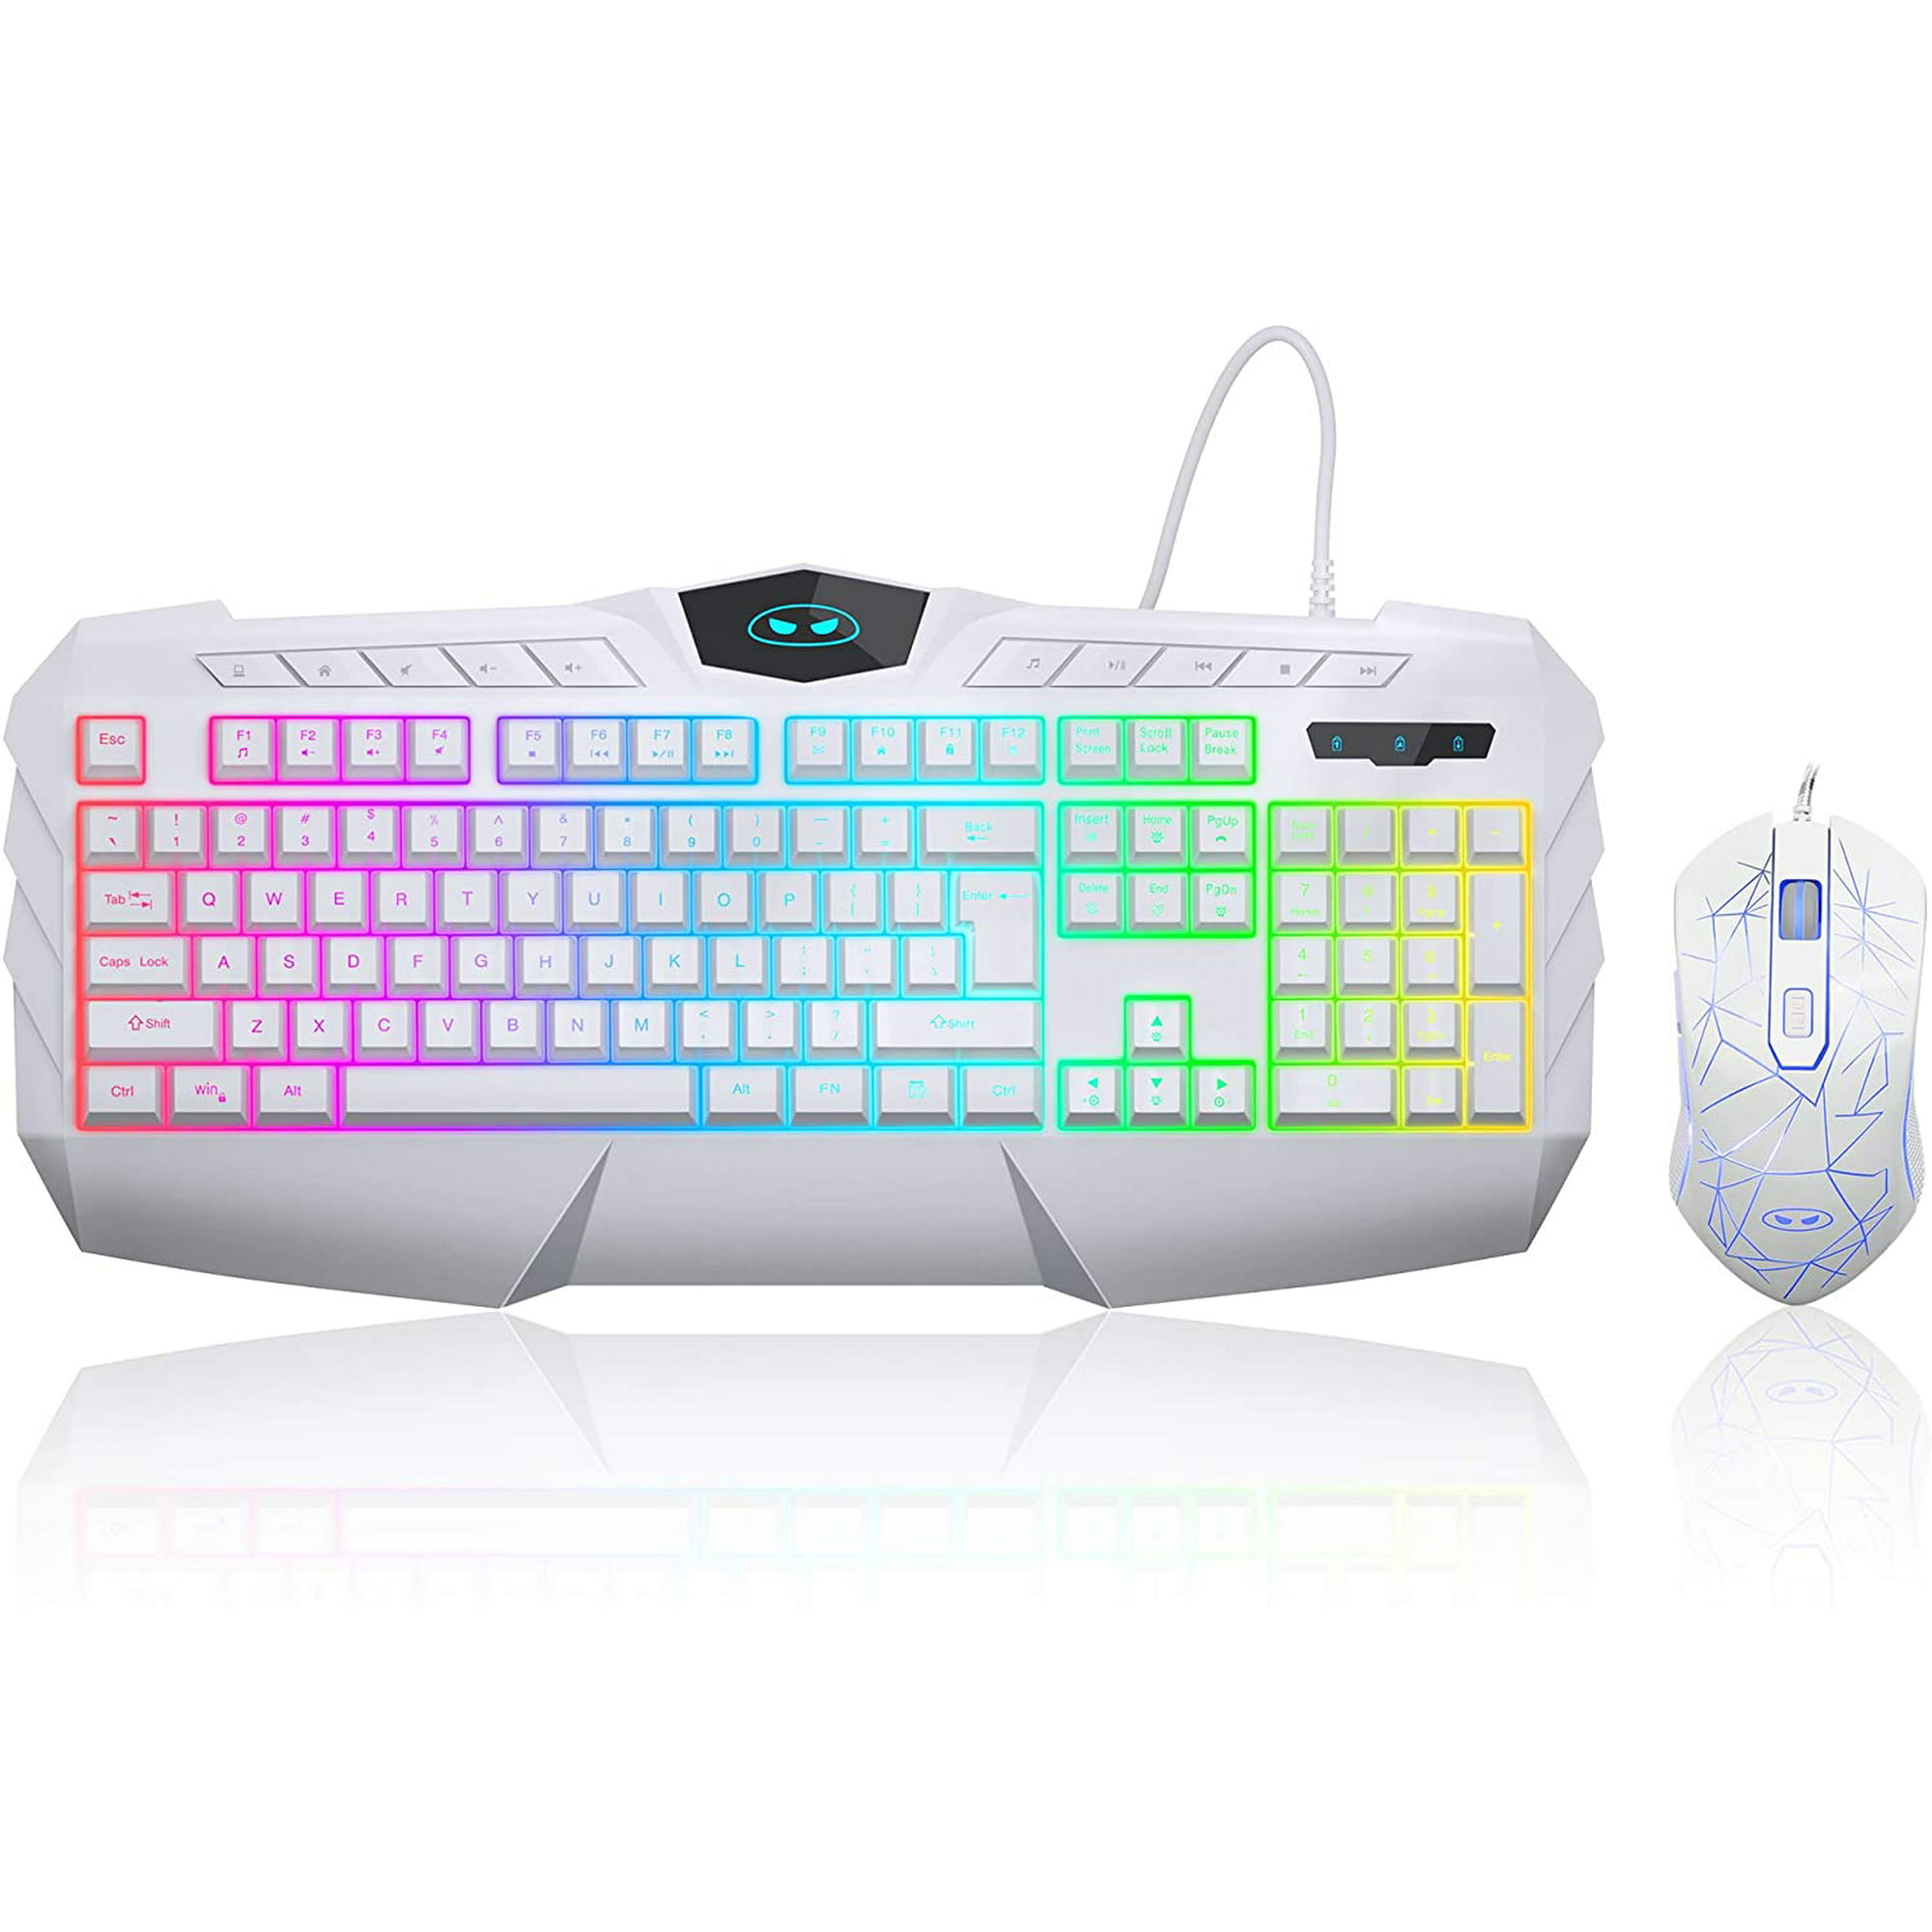 Gaming and Mouse Combo, Plannu GK770 RGB Backlit Wired Gaming Keyboard with Multimedia Keys, Ergonomic Wrist Rest Computer Keyboard, 3200 DPI Gaming Mouse for Windows PC Gamers | Walmart Canada